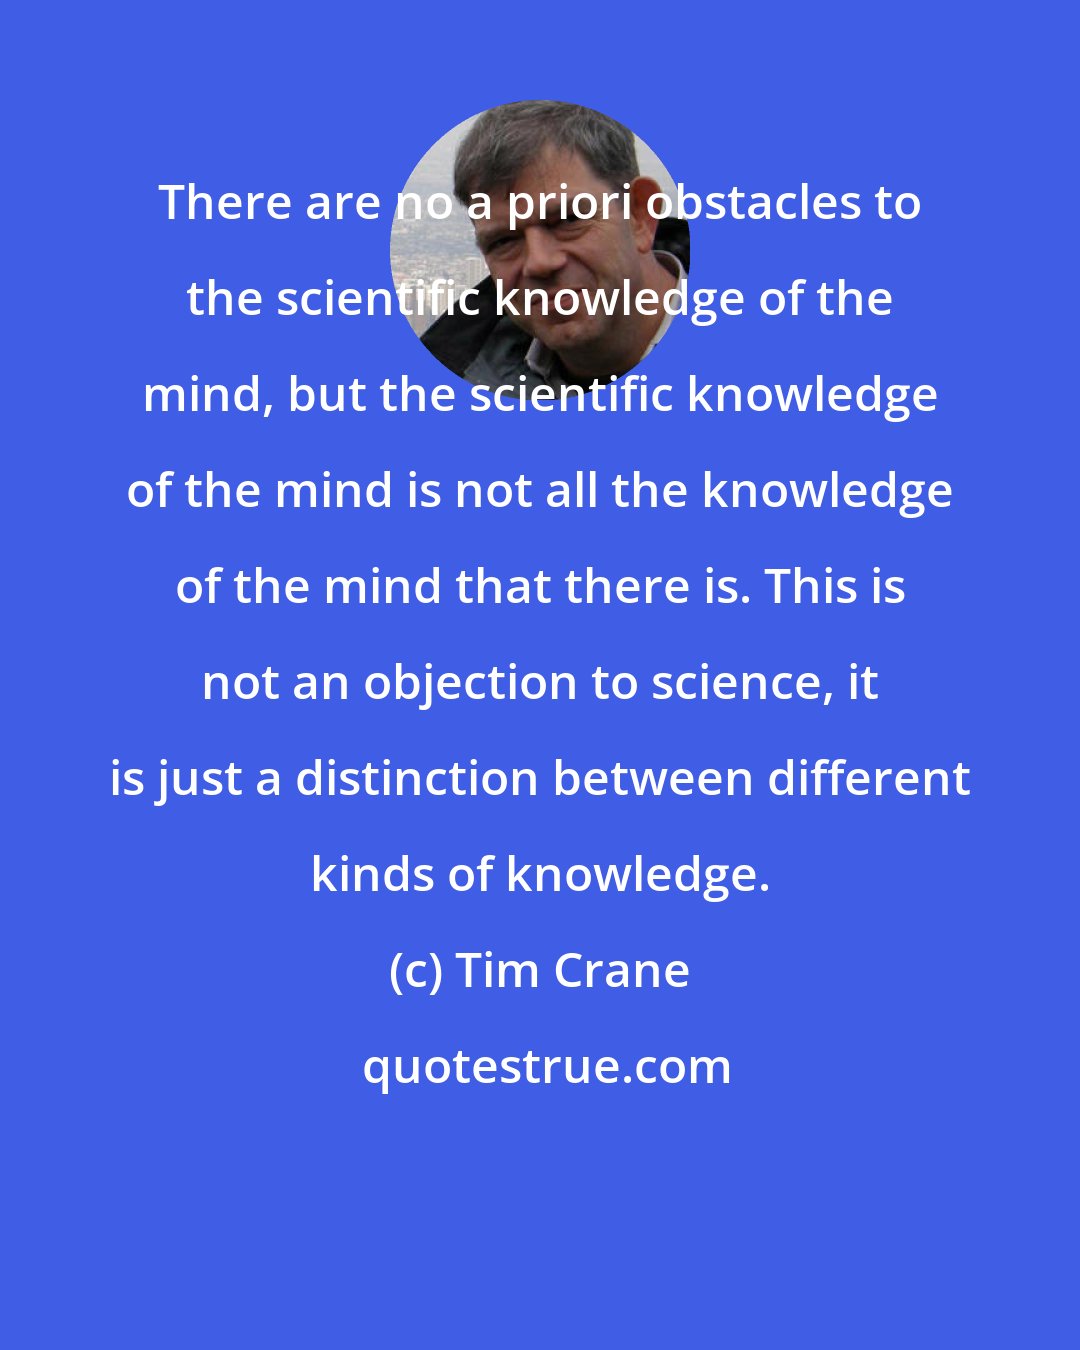 Tim Crane: There are no a priori obstacles to the scientific knowledge of the mind, but the scientific knowledge of the mind is not all the knowledge of the mind that there is. This is not an objection to science, it is just a distinction between different kinds of knowledge.